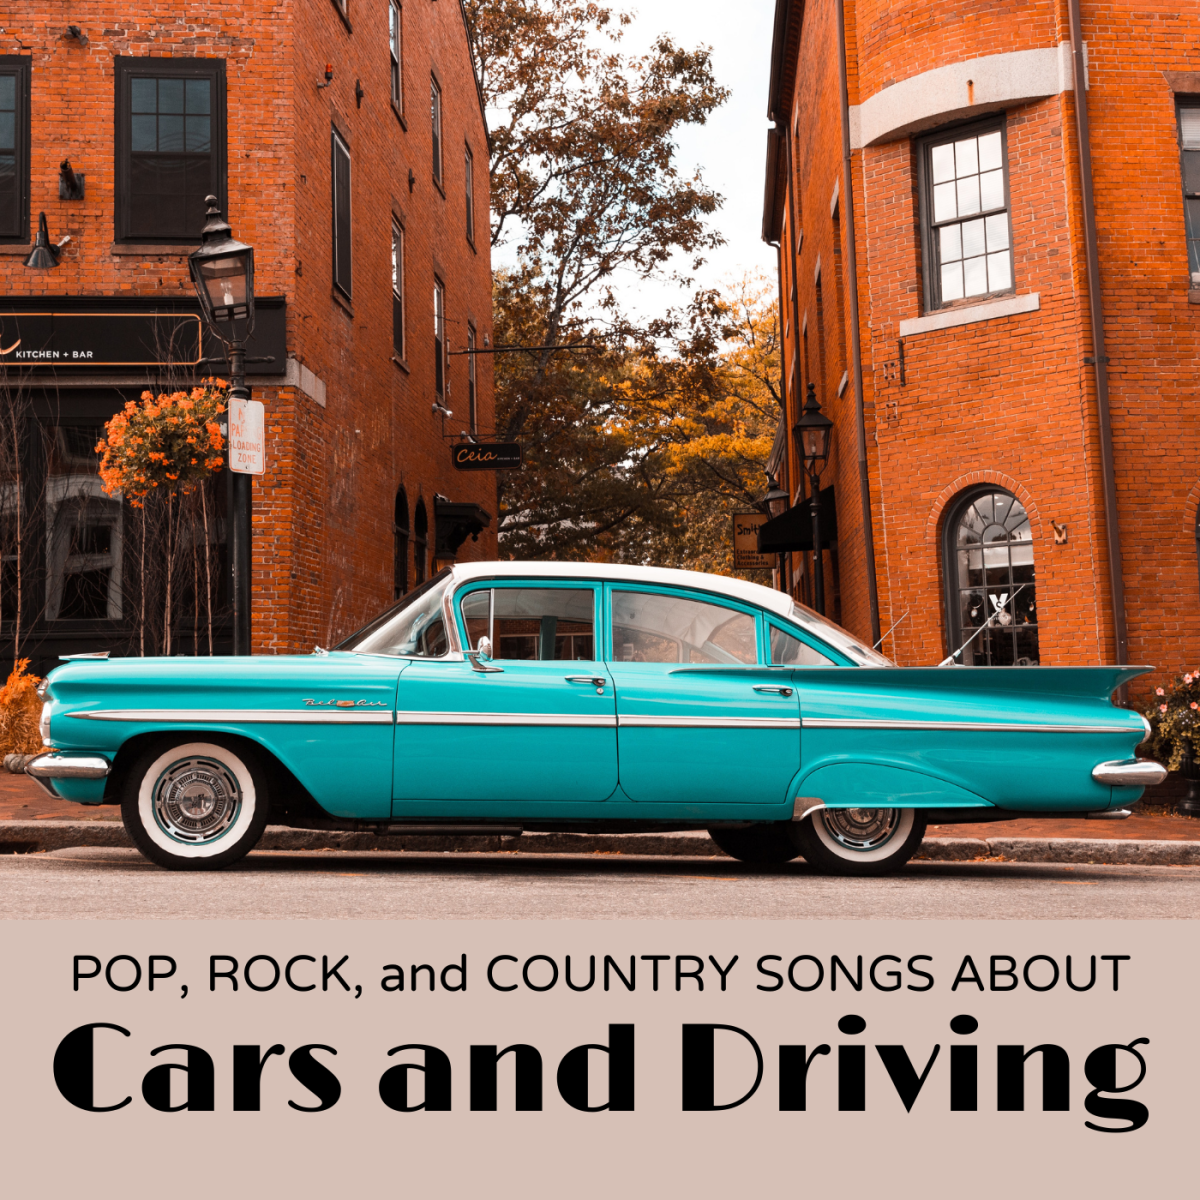 Cars represent freedom and youth for many Americans. Celebrate the automobile with a customized playlist. We have a long list of pop, rock, and country songs about cars and driving to get you started.